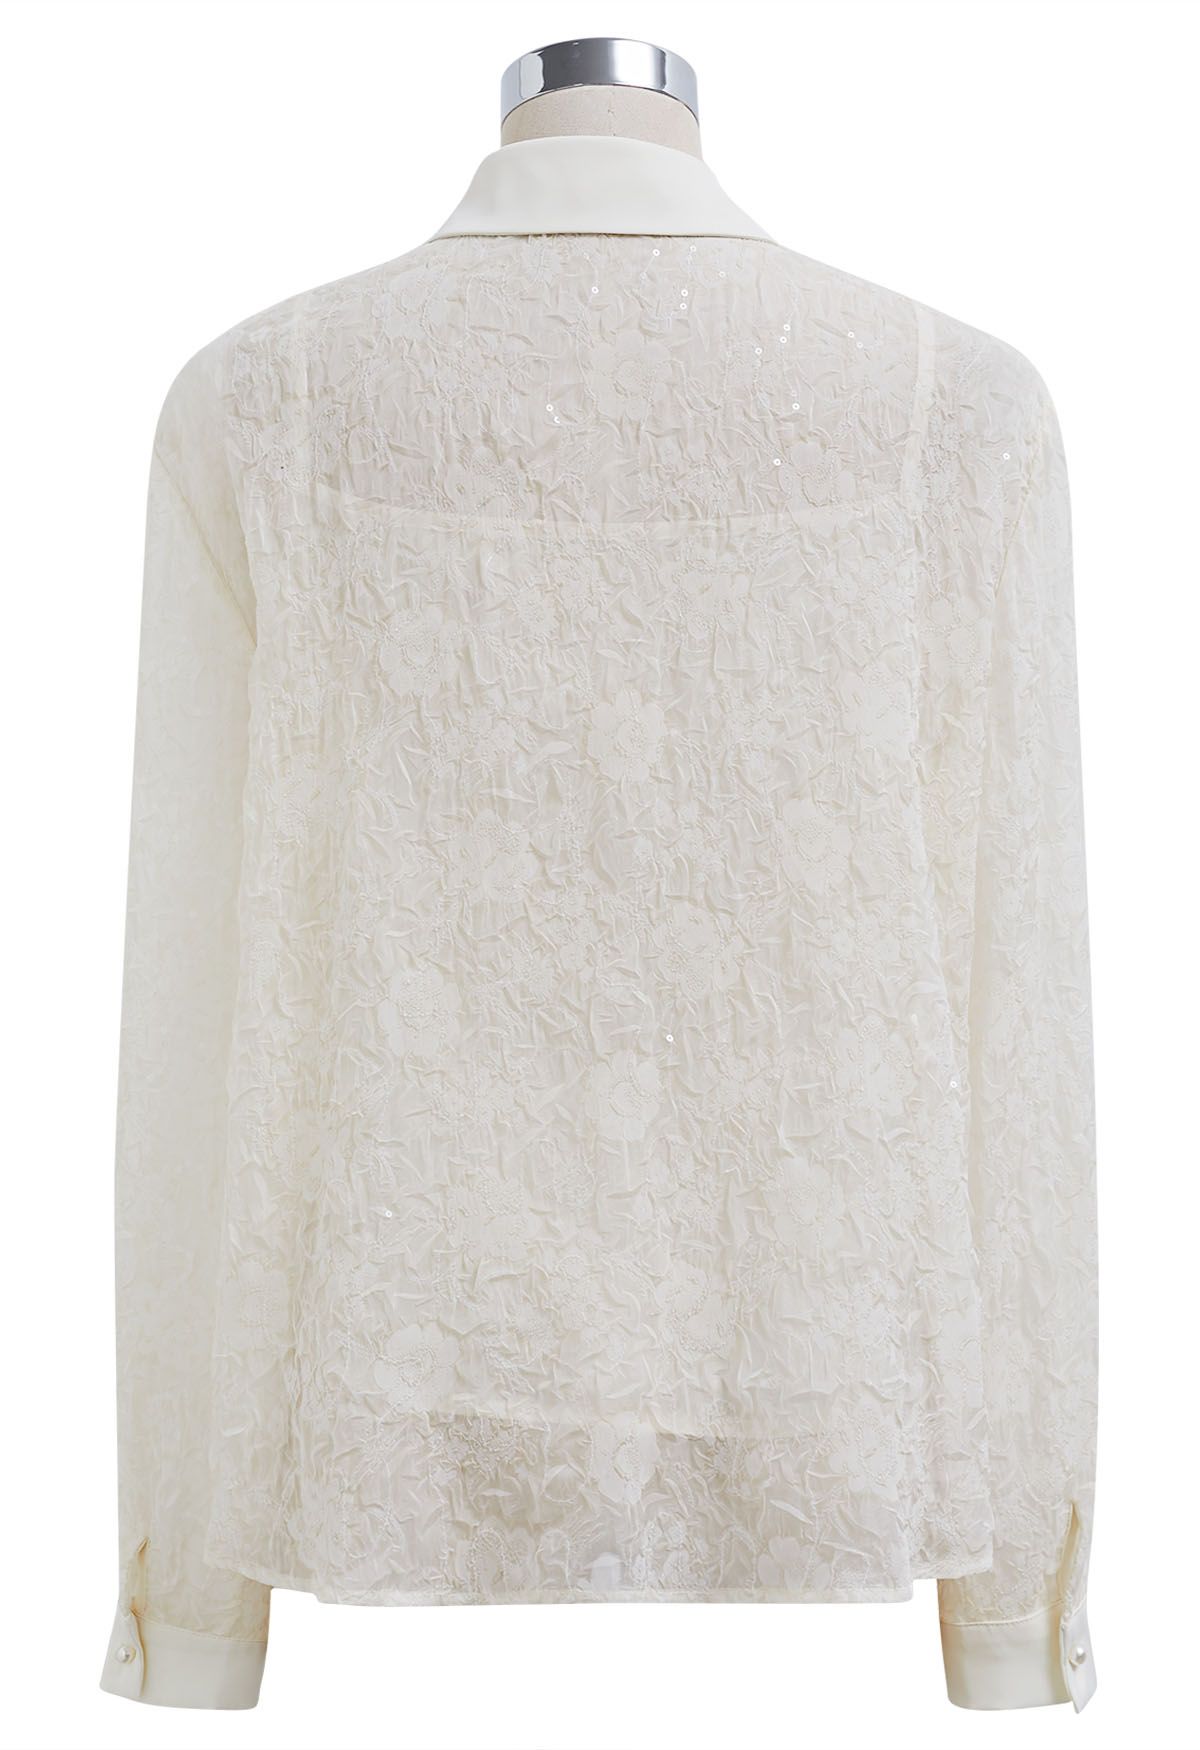 Floral Mesh Sequin Buttoned Shirt in Cream